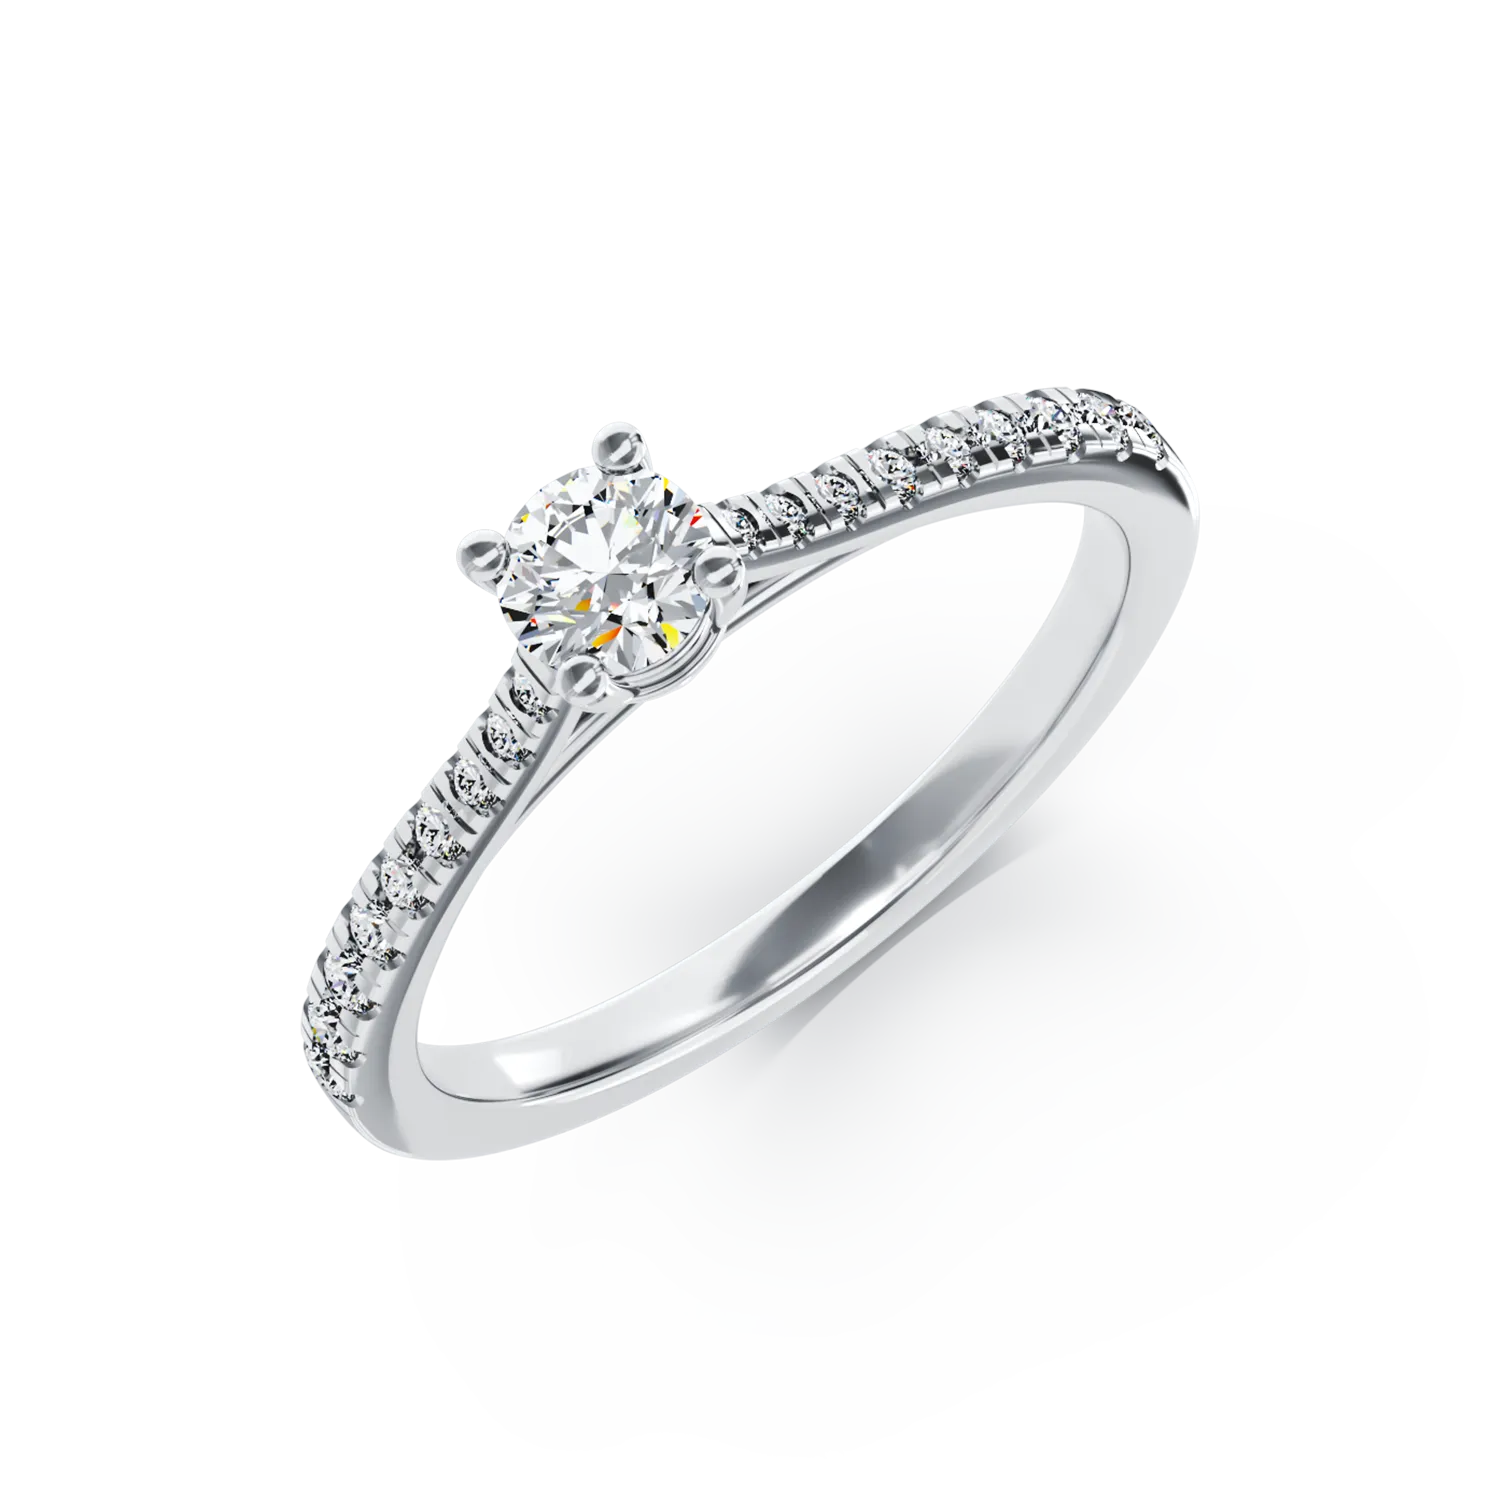 18K white gold engagement ring with 0.16ct diamond and 0.17ct diamonds